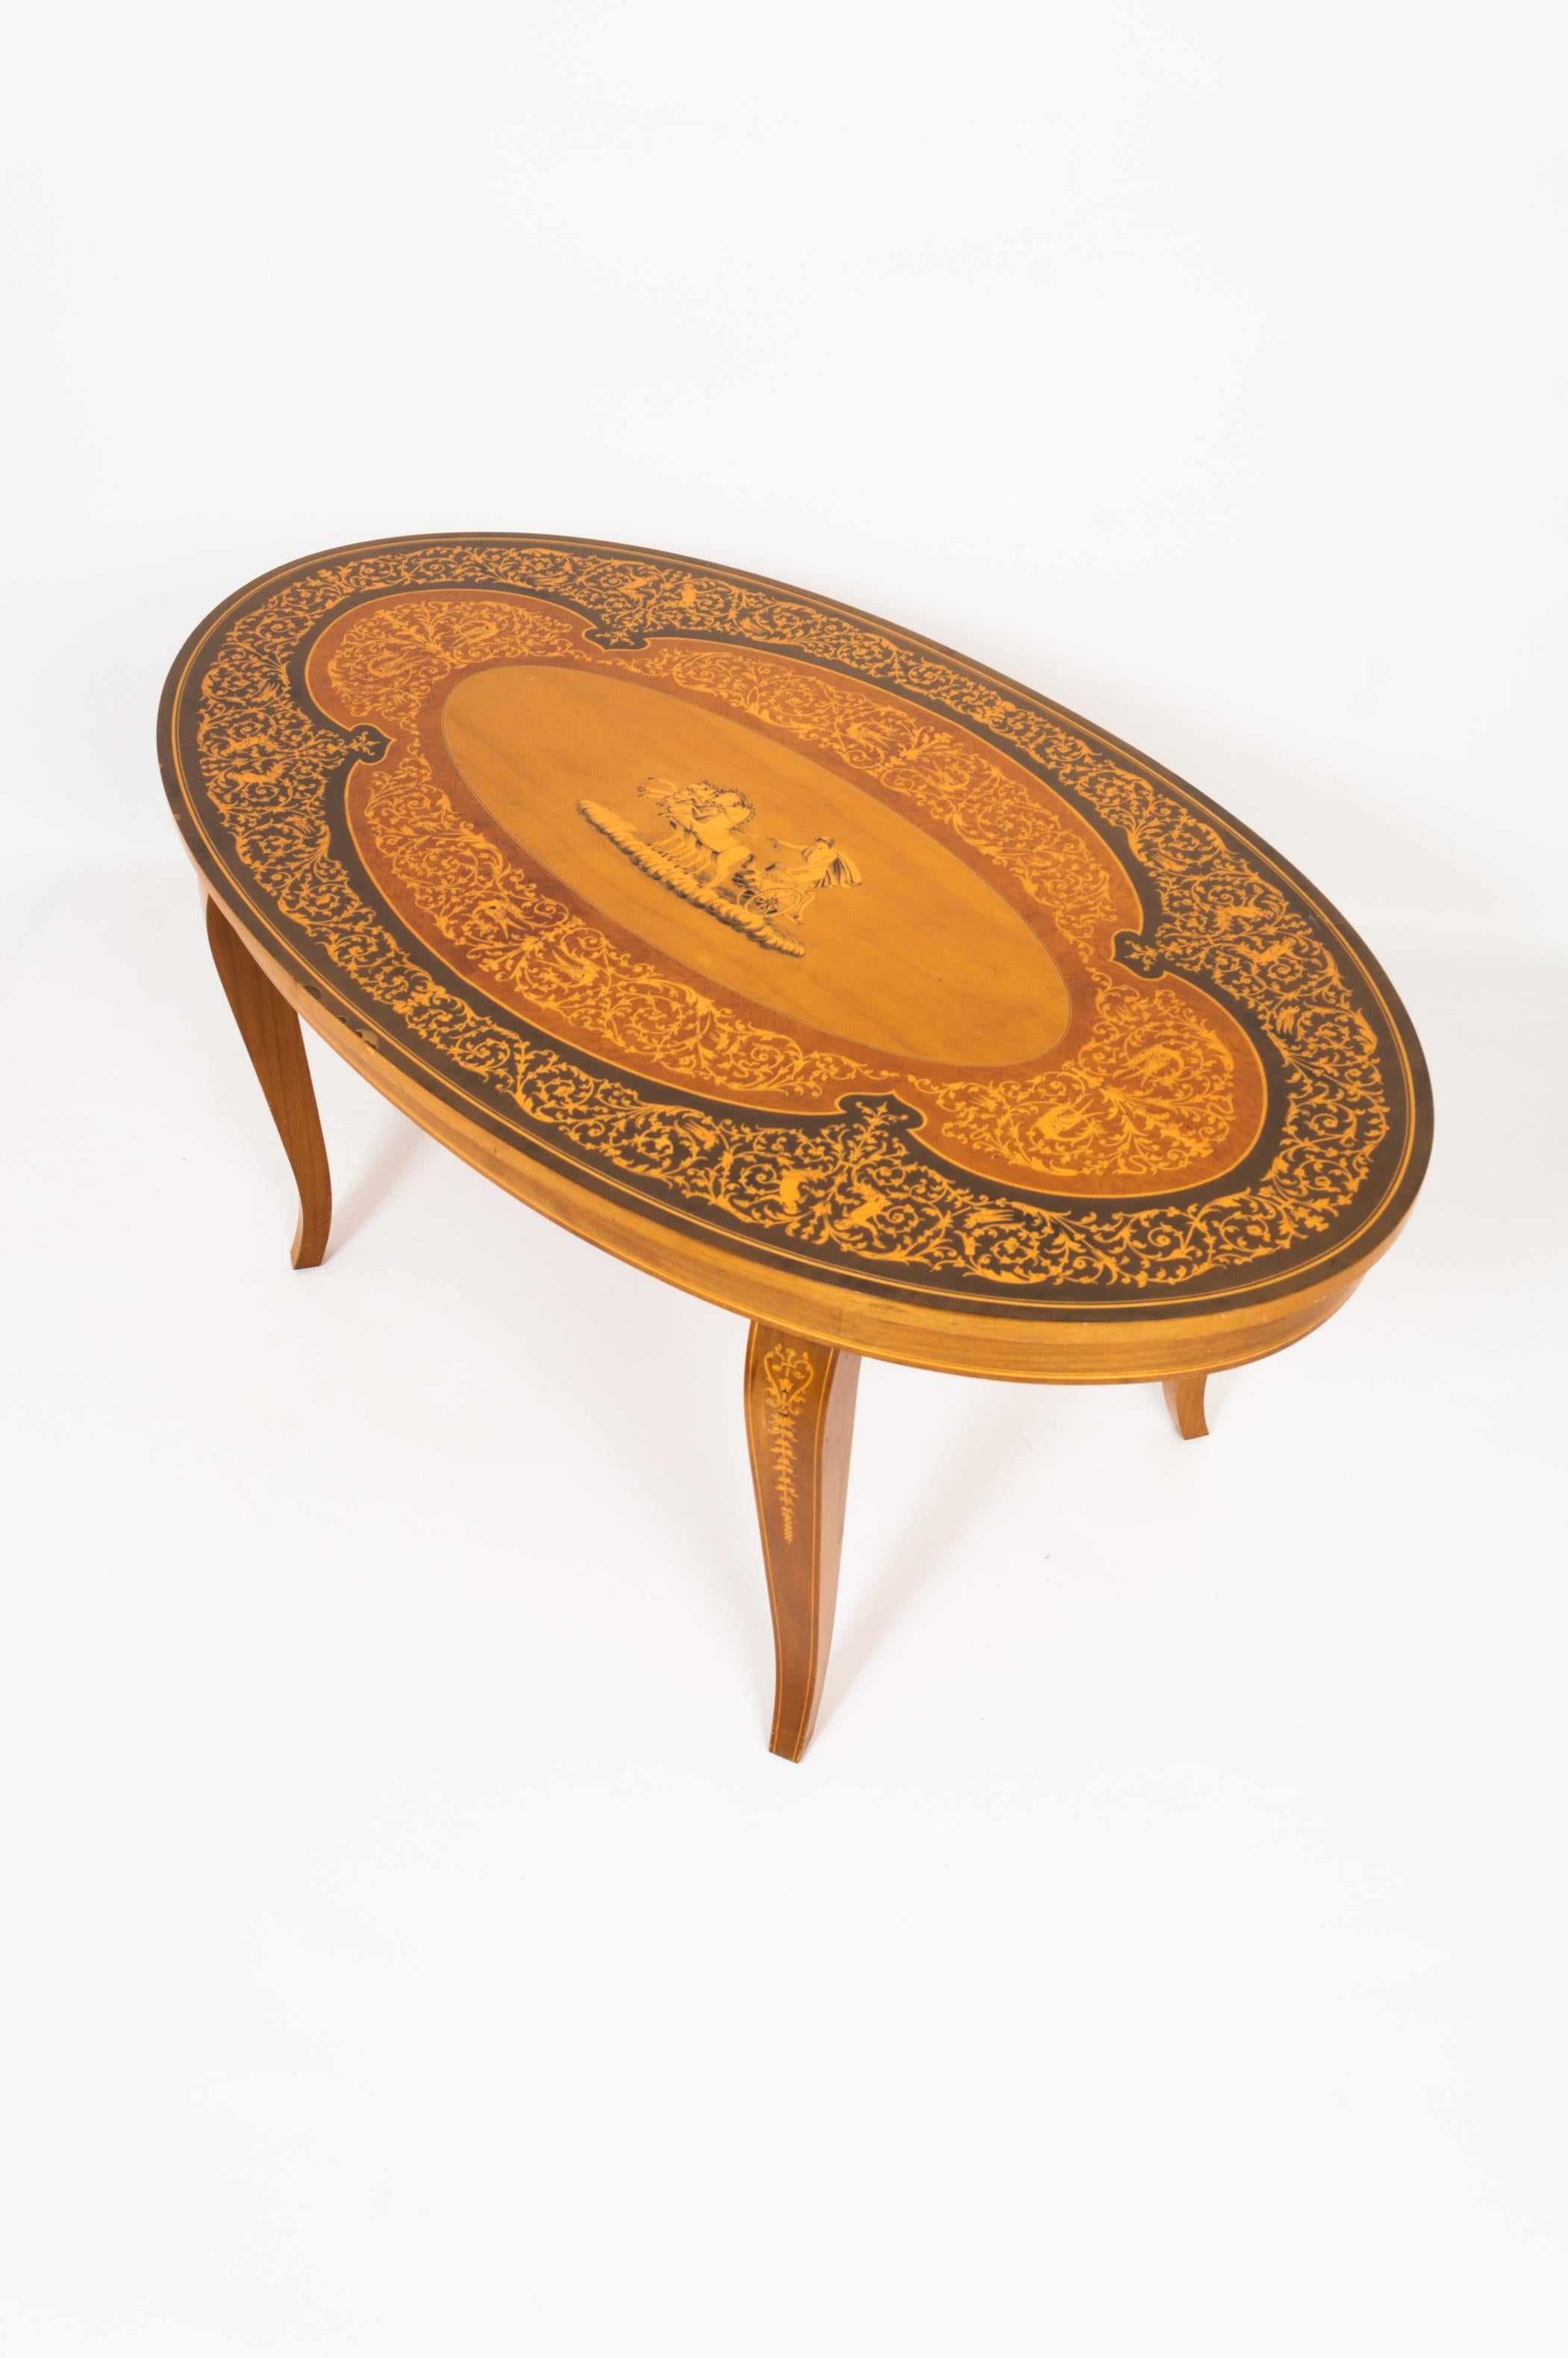 An Italian coffee table dating from C.1960 Sorrento Italy. 
Intricately inlaid in marquetry detailing throughout
In very good vintage condition with minor signs of wear to the lacquer on one edge of the table top. All in all, beautifully